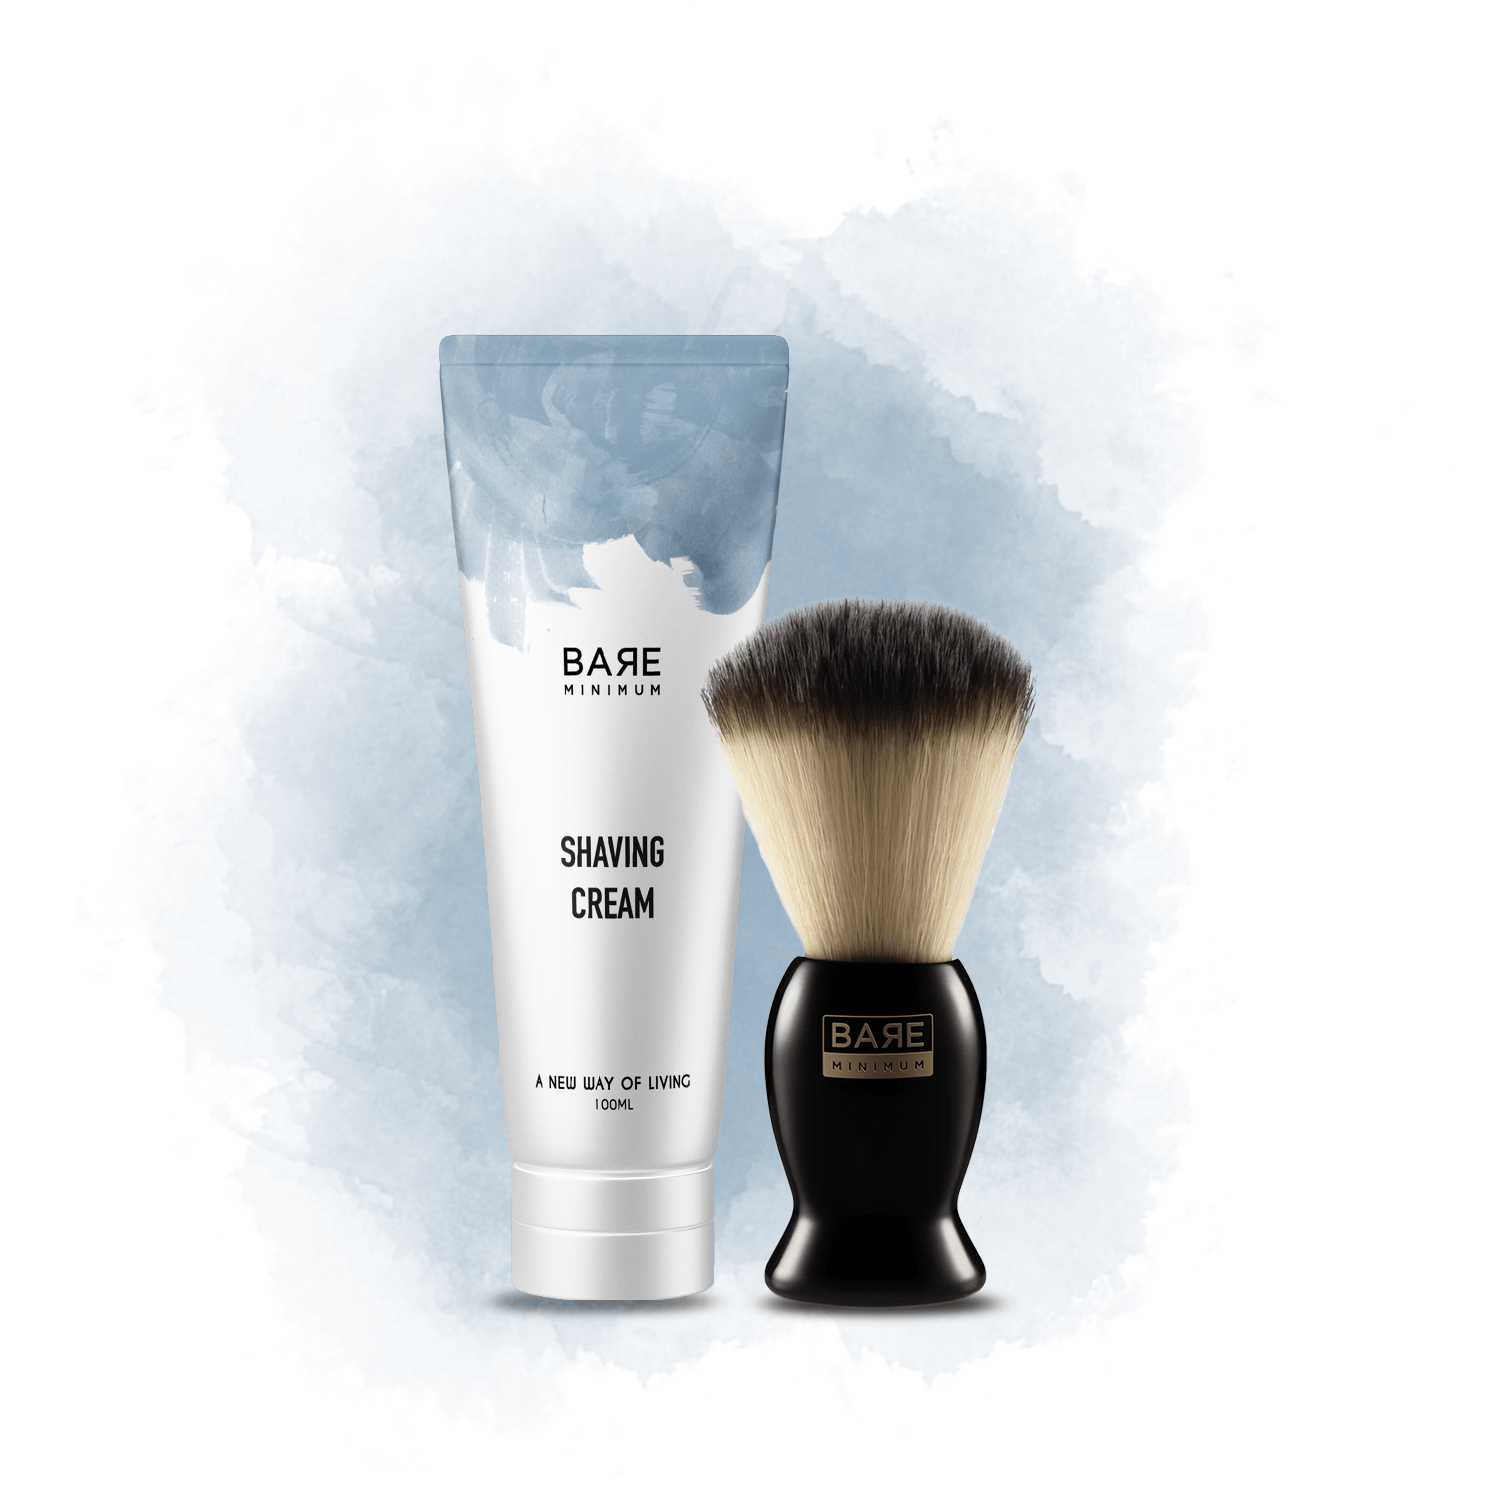 Bare Minimum | Combo of Shaving Cream + Shaving Brush | With The Extracts Of Sandalwood And Holy Basil | pH-Balanced Formula | Gender-Neutral | For All Skin Types (Shaving Cream 100g + Shaving Brush)